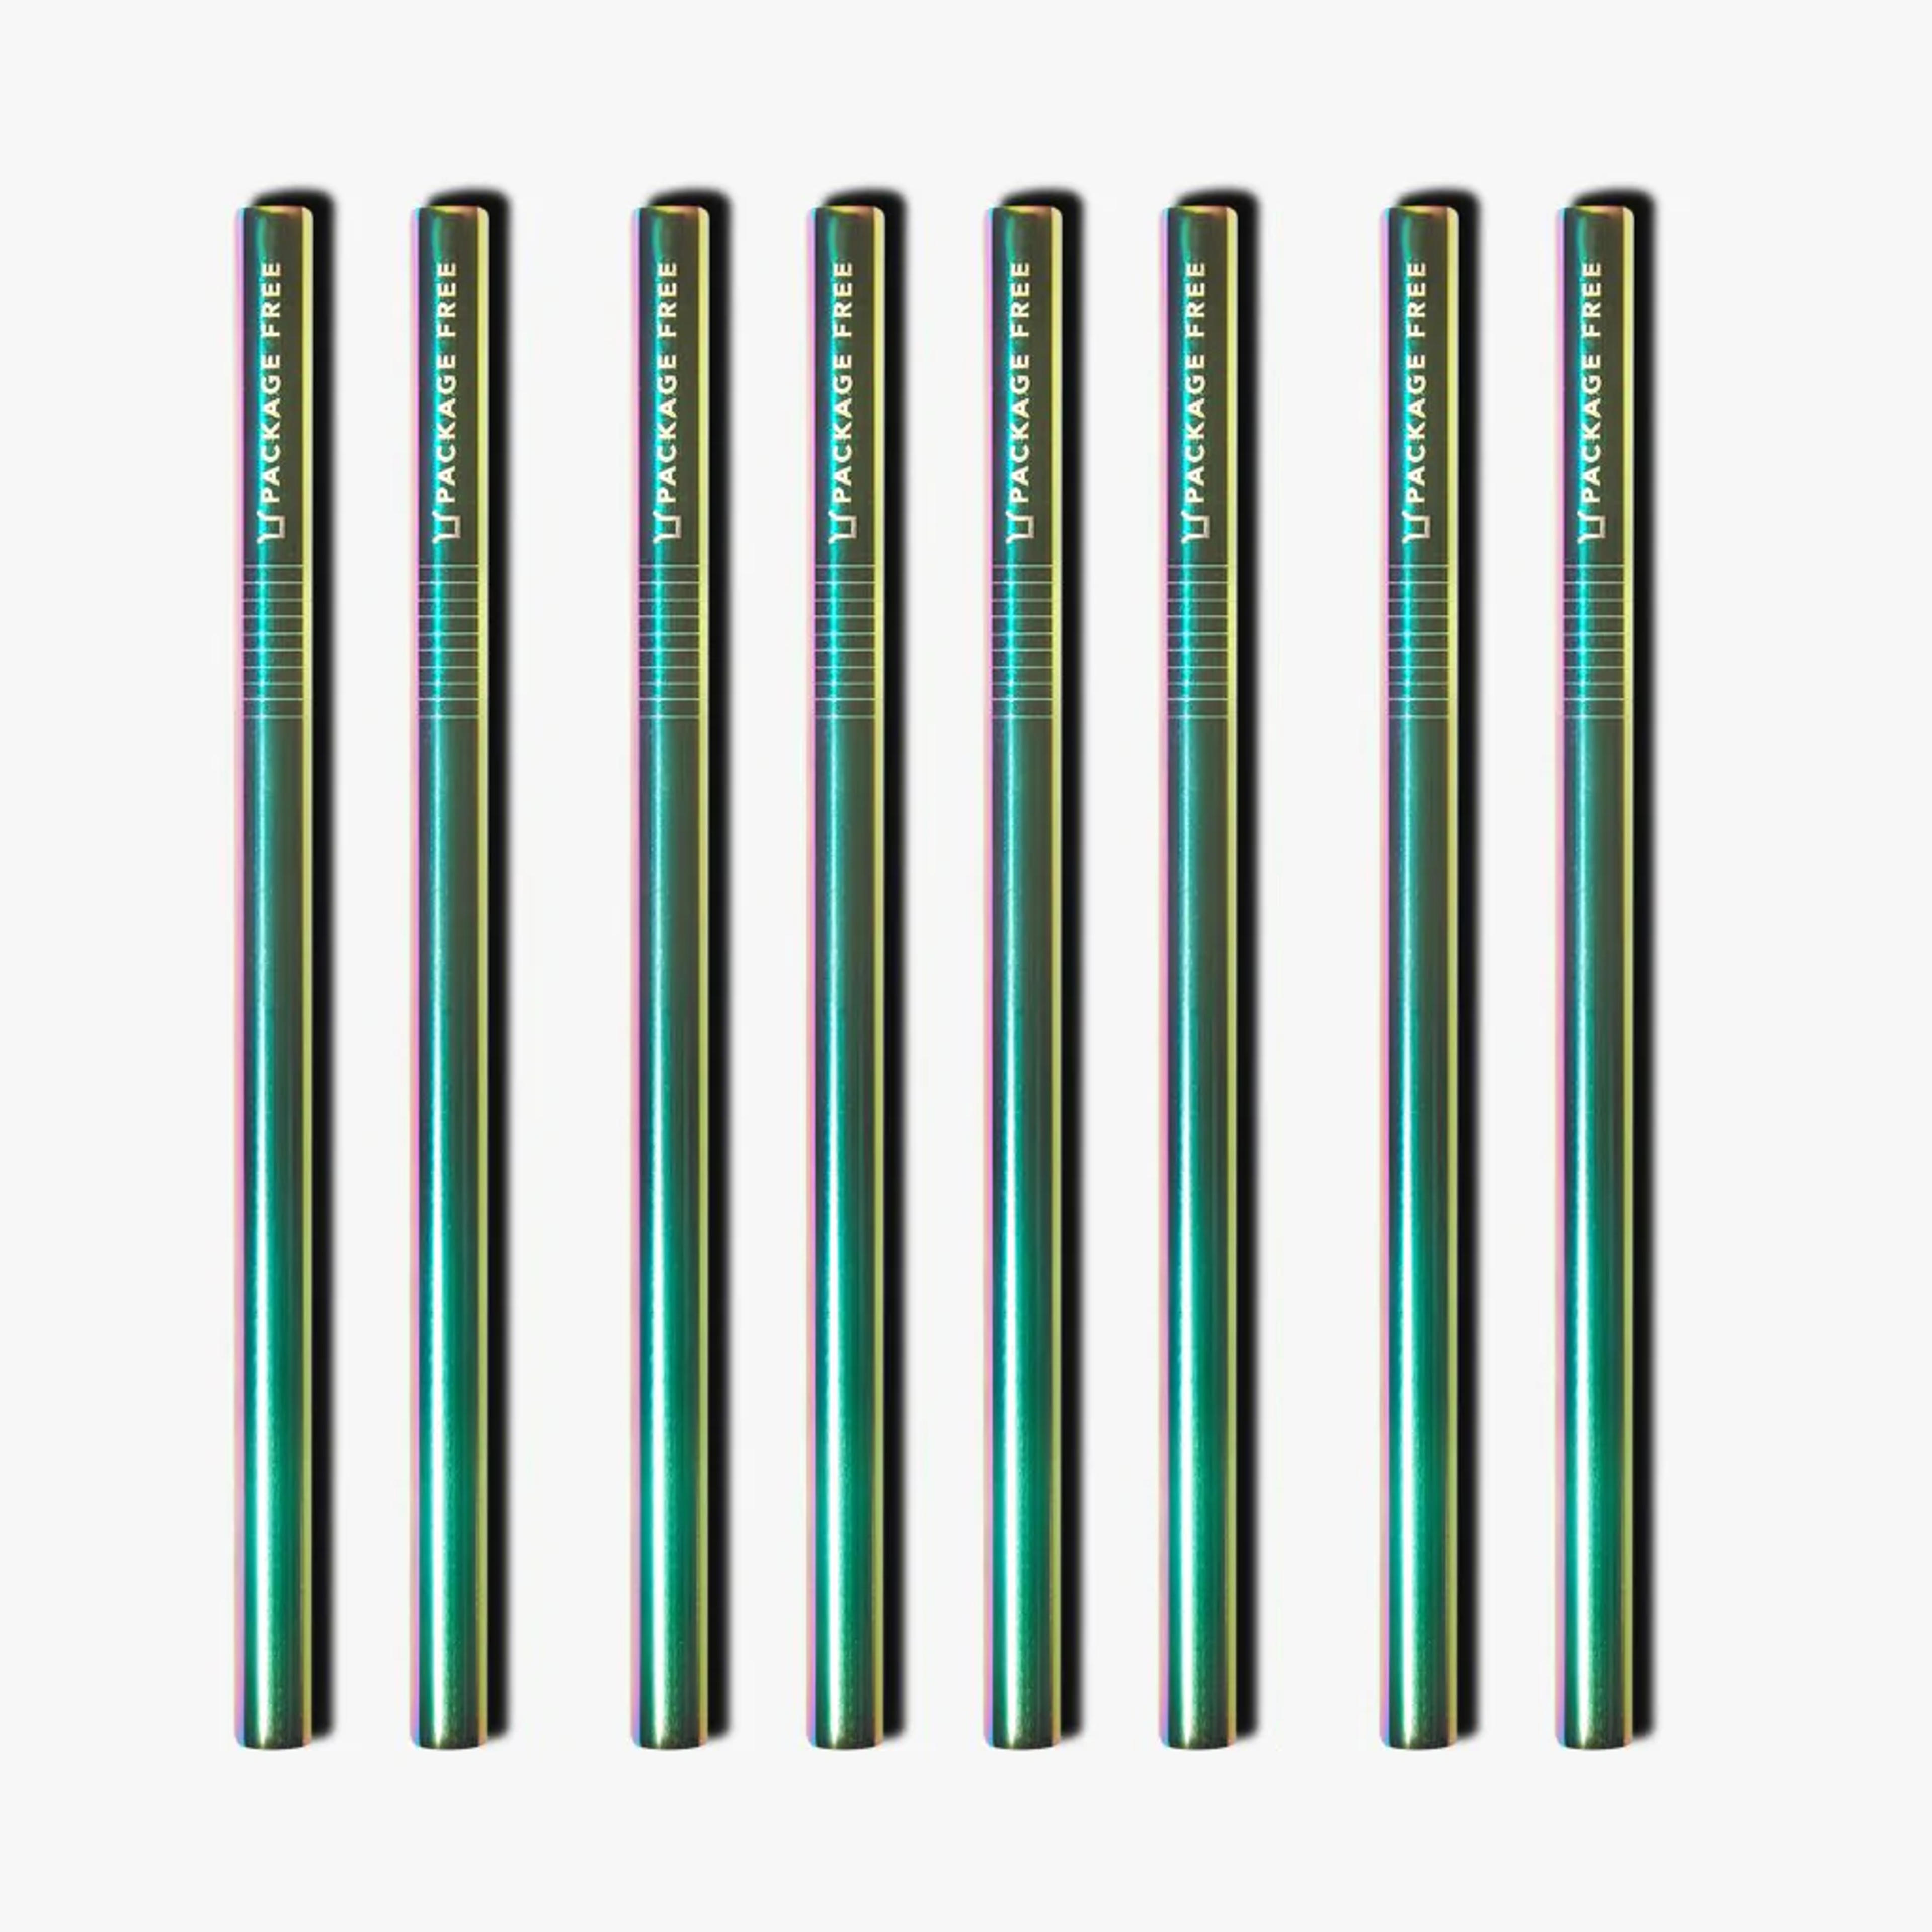 Stainless Steel Bubble Tea Straw - Rainbow 8 Pack